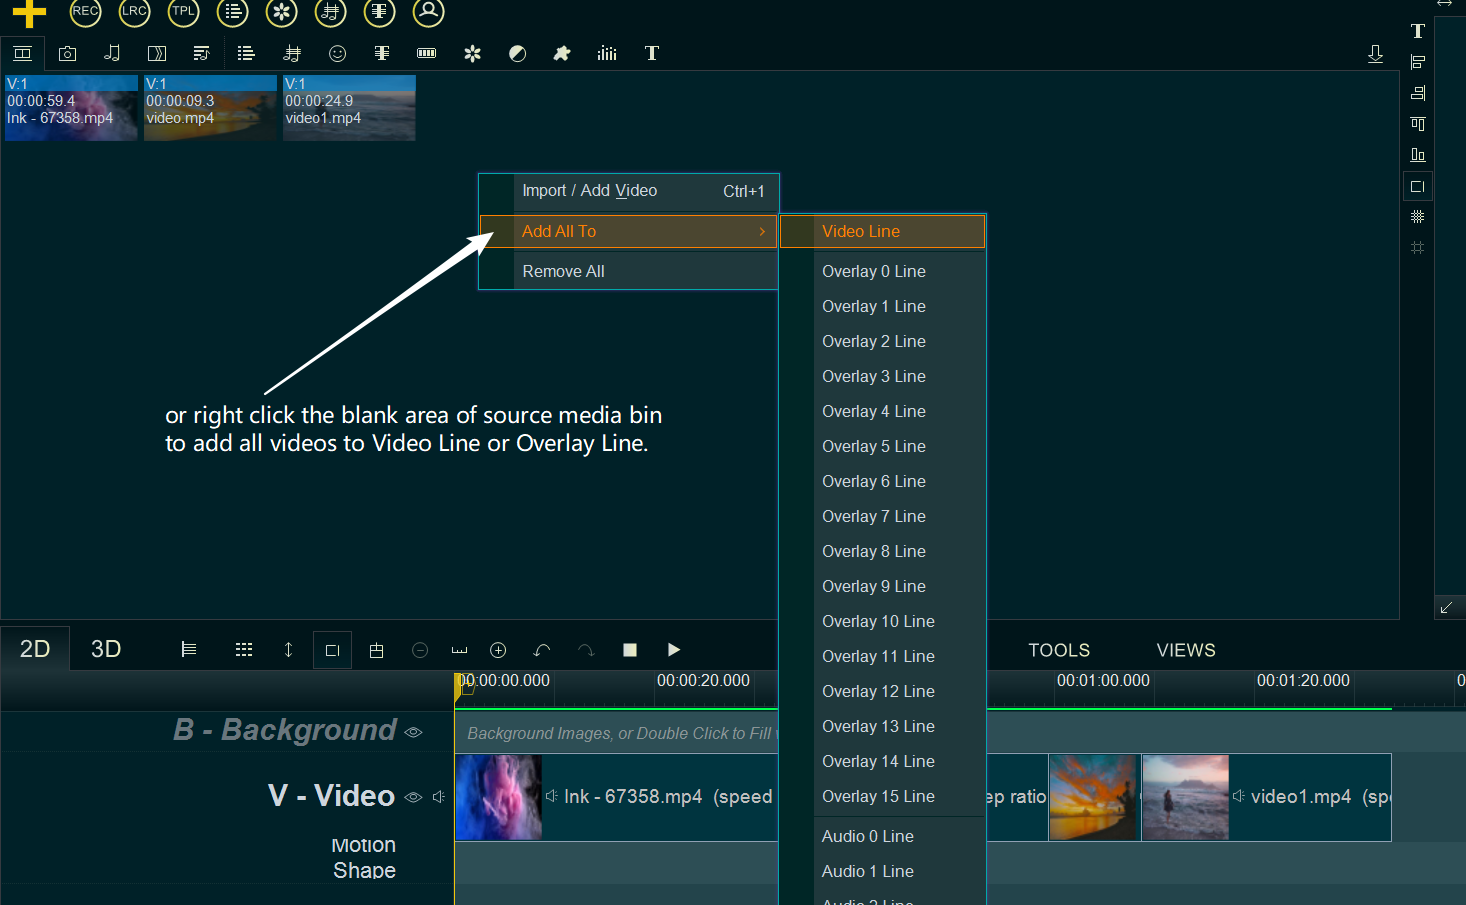 add all videos into Video Line or Overlay Line by right-clicking on the blank area of source media bin.